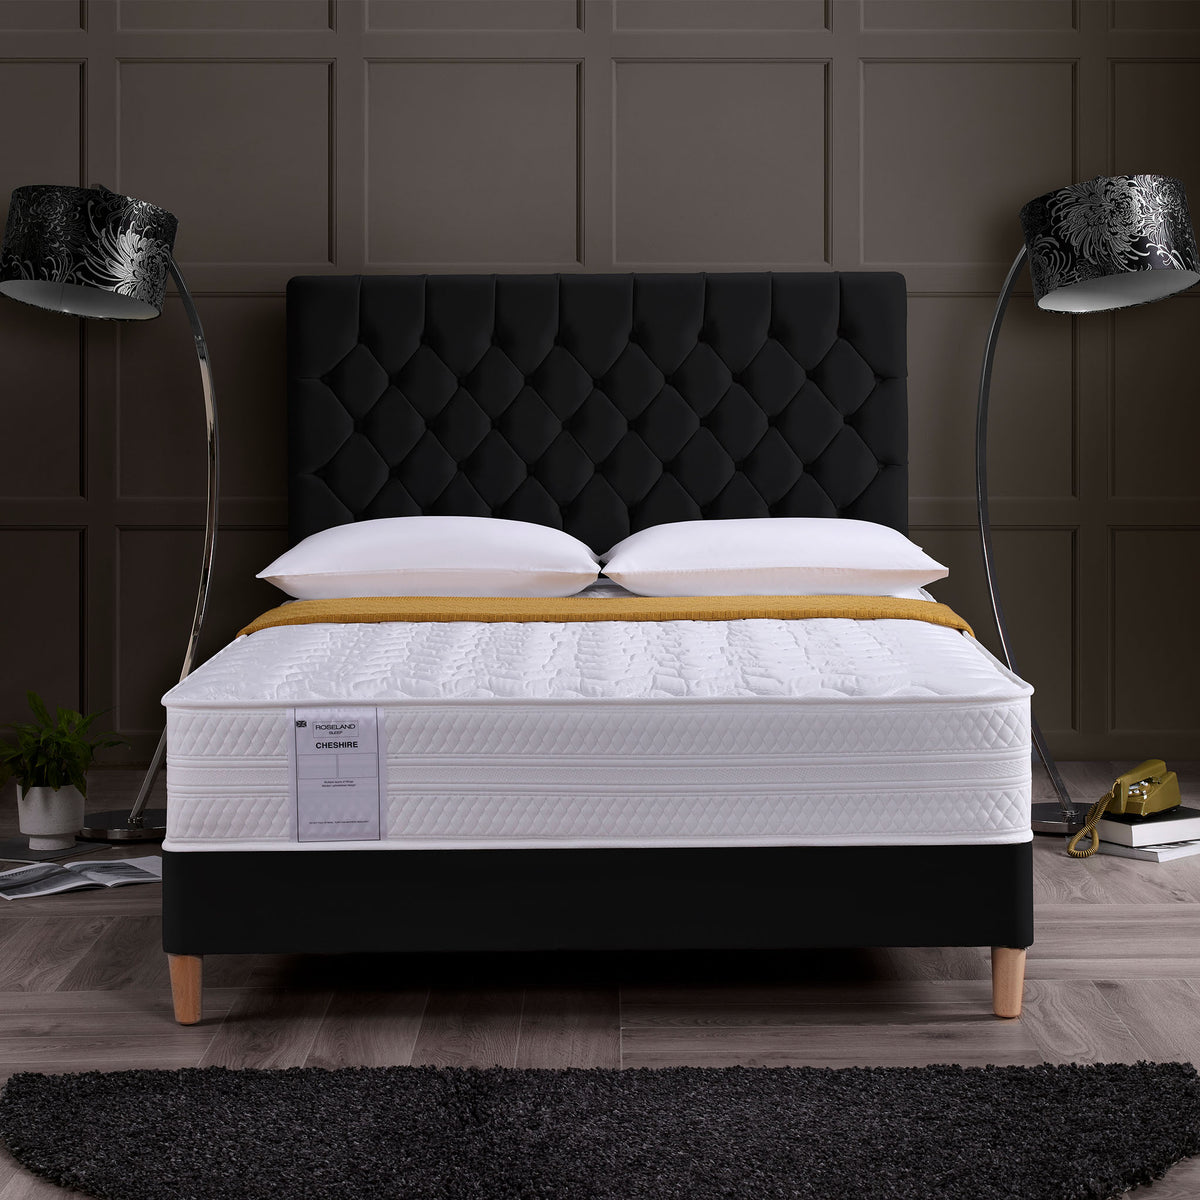 Cheshire Support Mattress by Roseland Sleep front lifestyle image